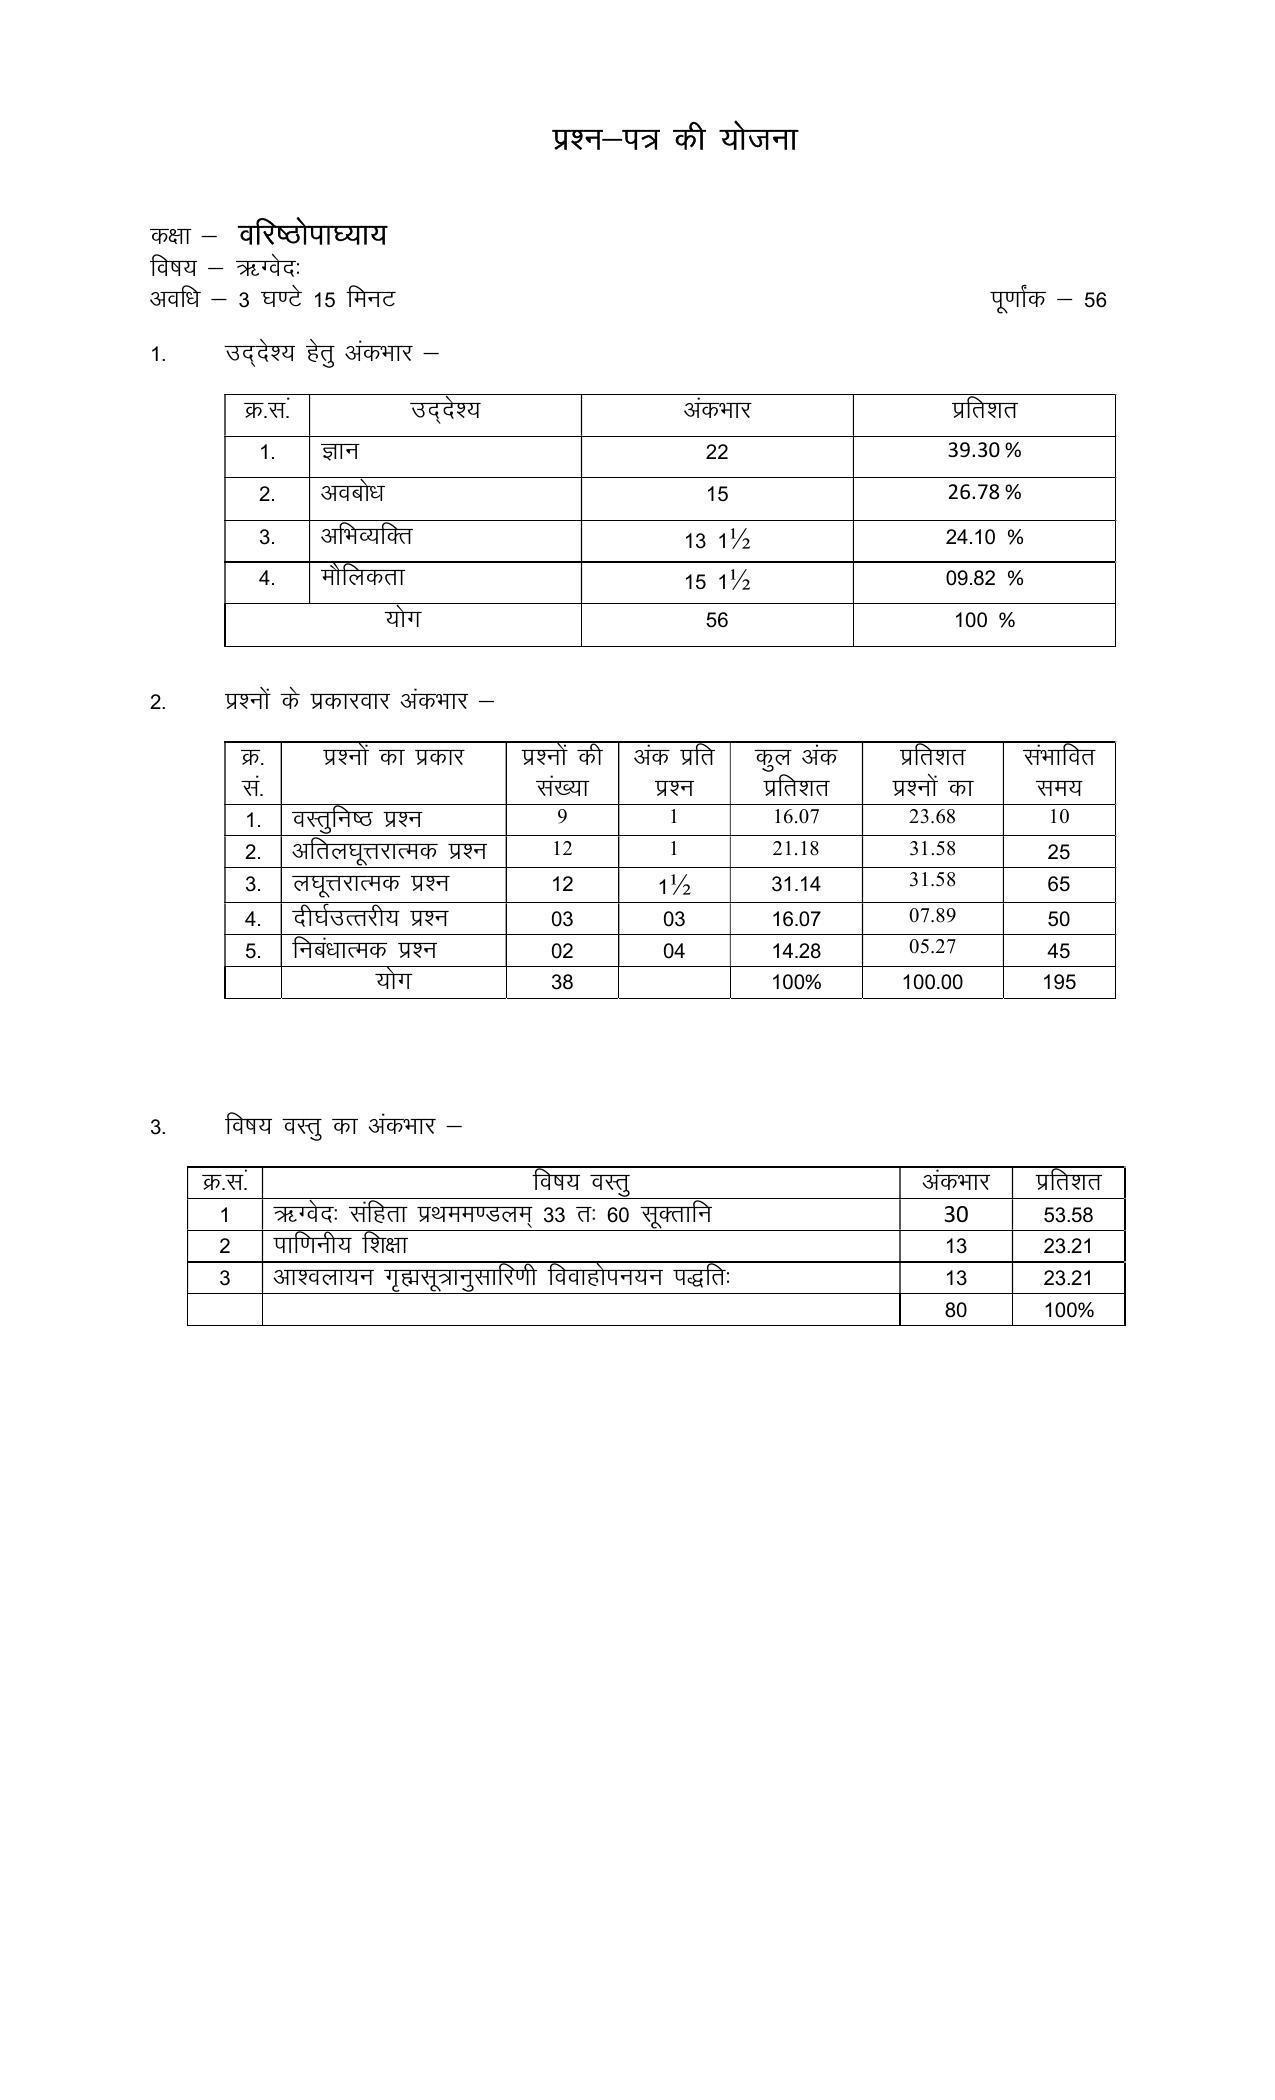 RBSE 2023 CLASS 12 RIGVED Paper - Page 1